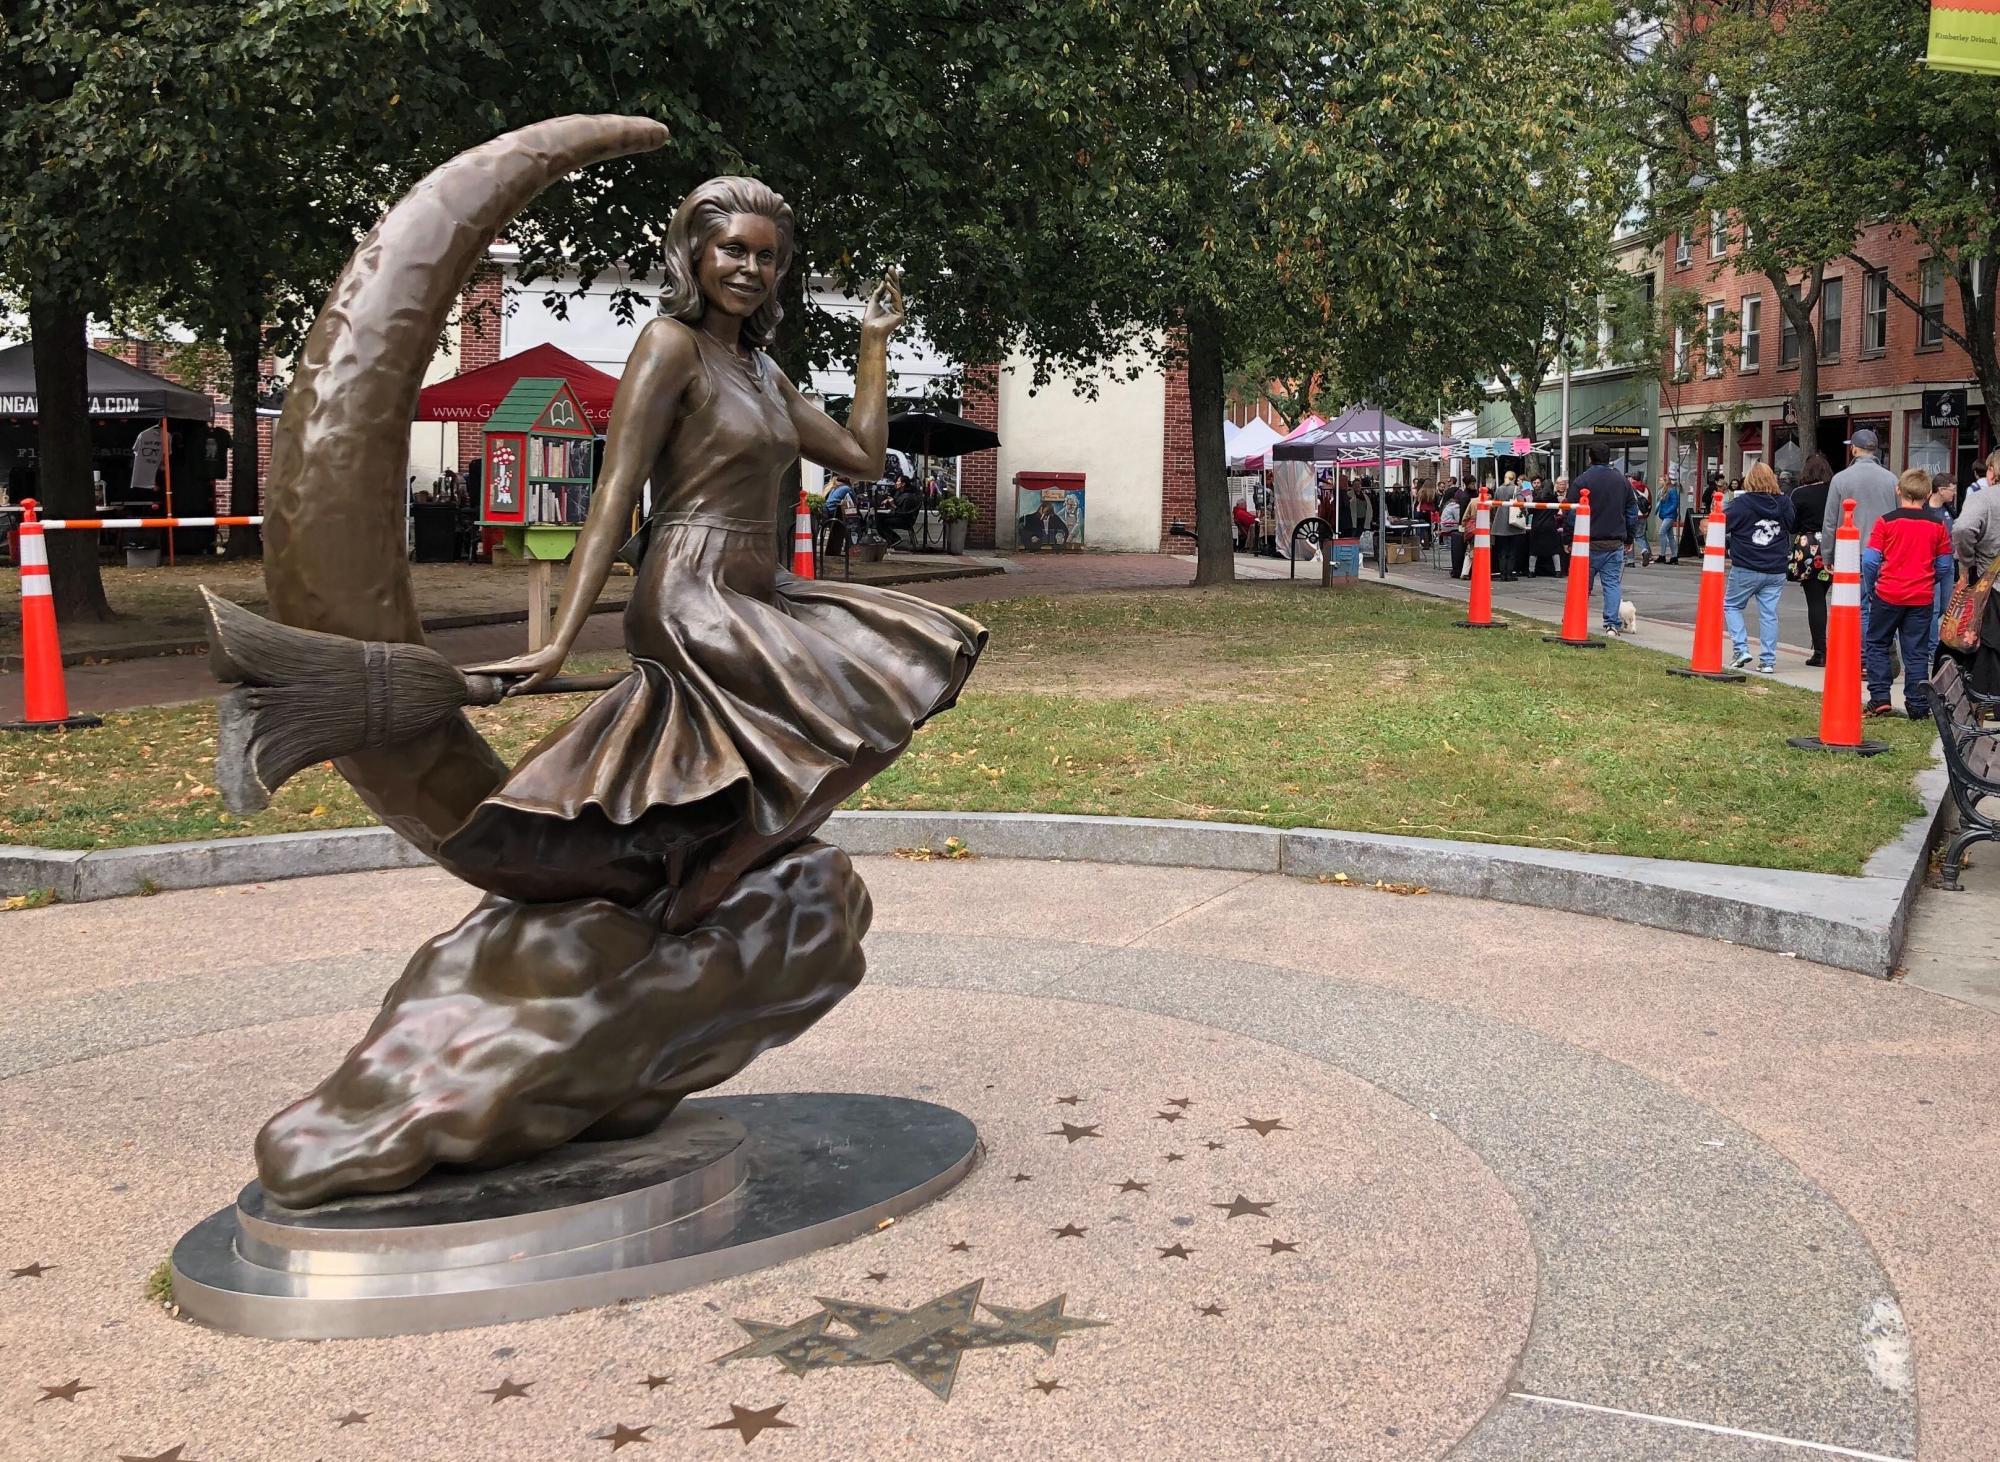 The Bewitched statue in downtown Salem